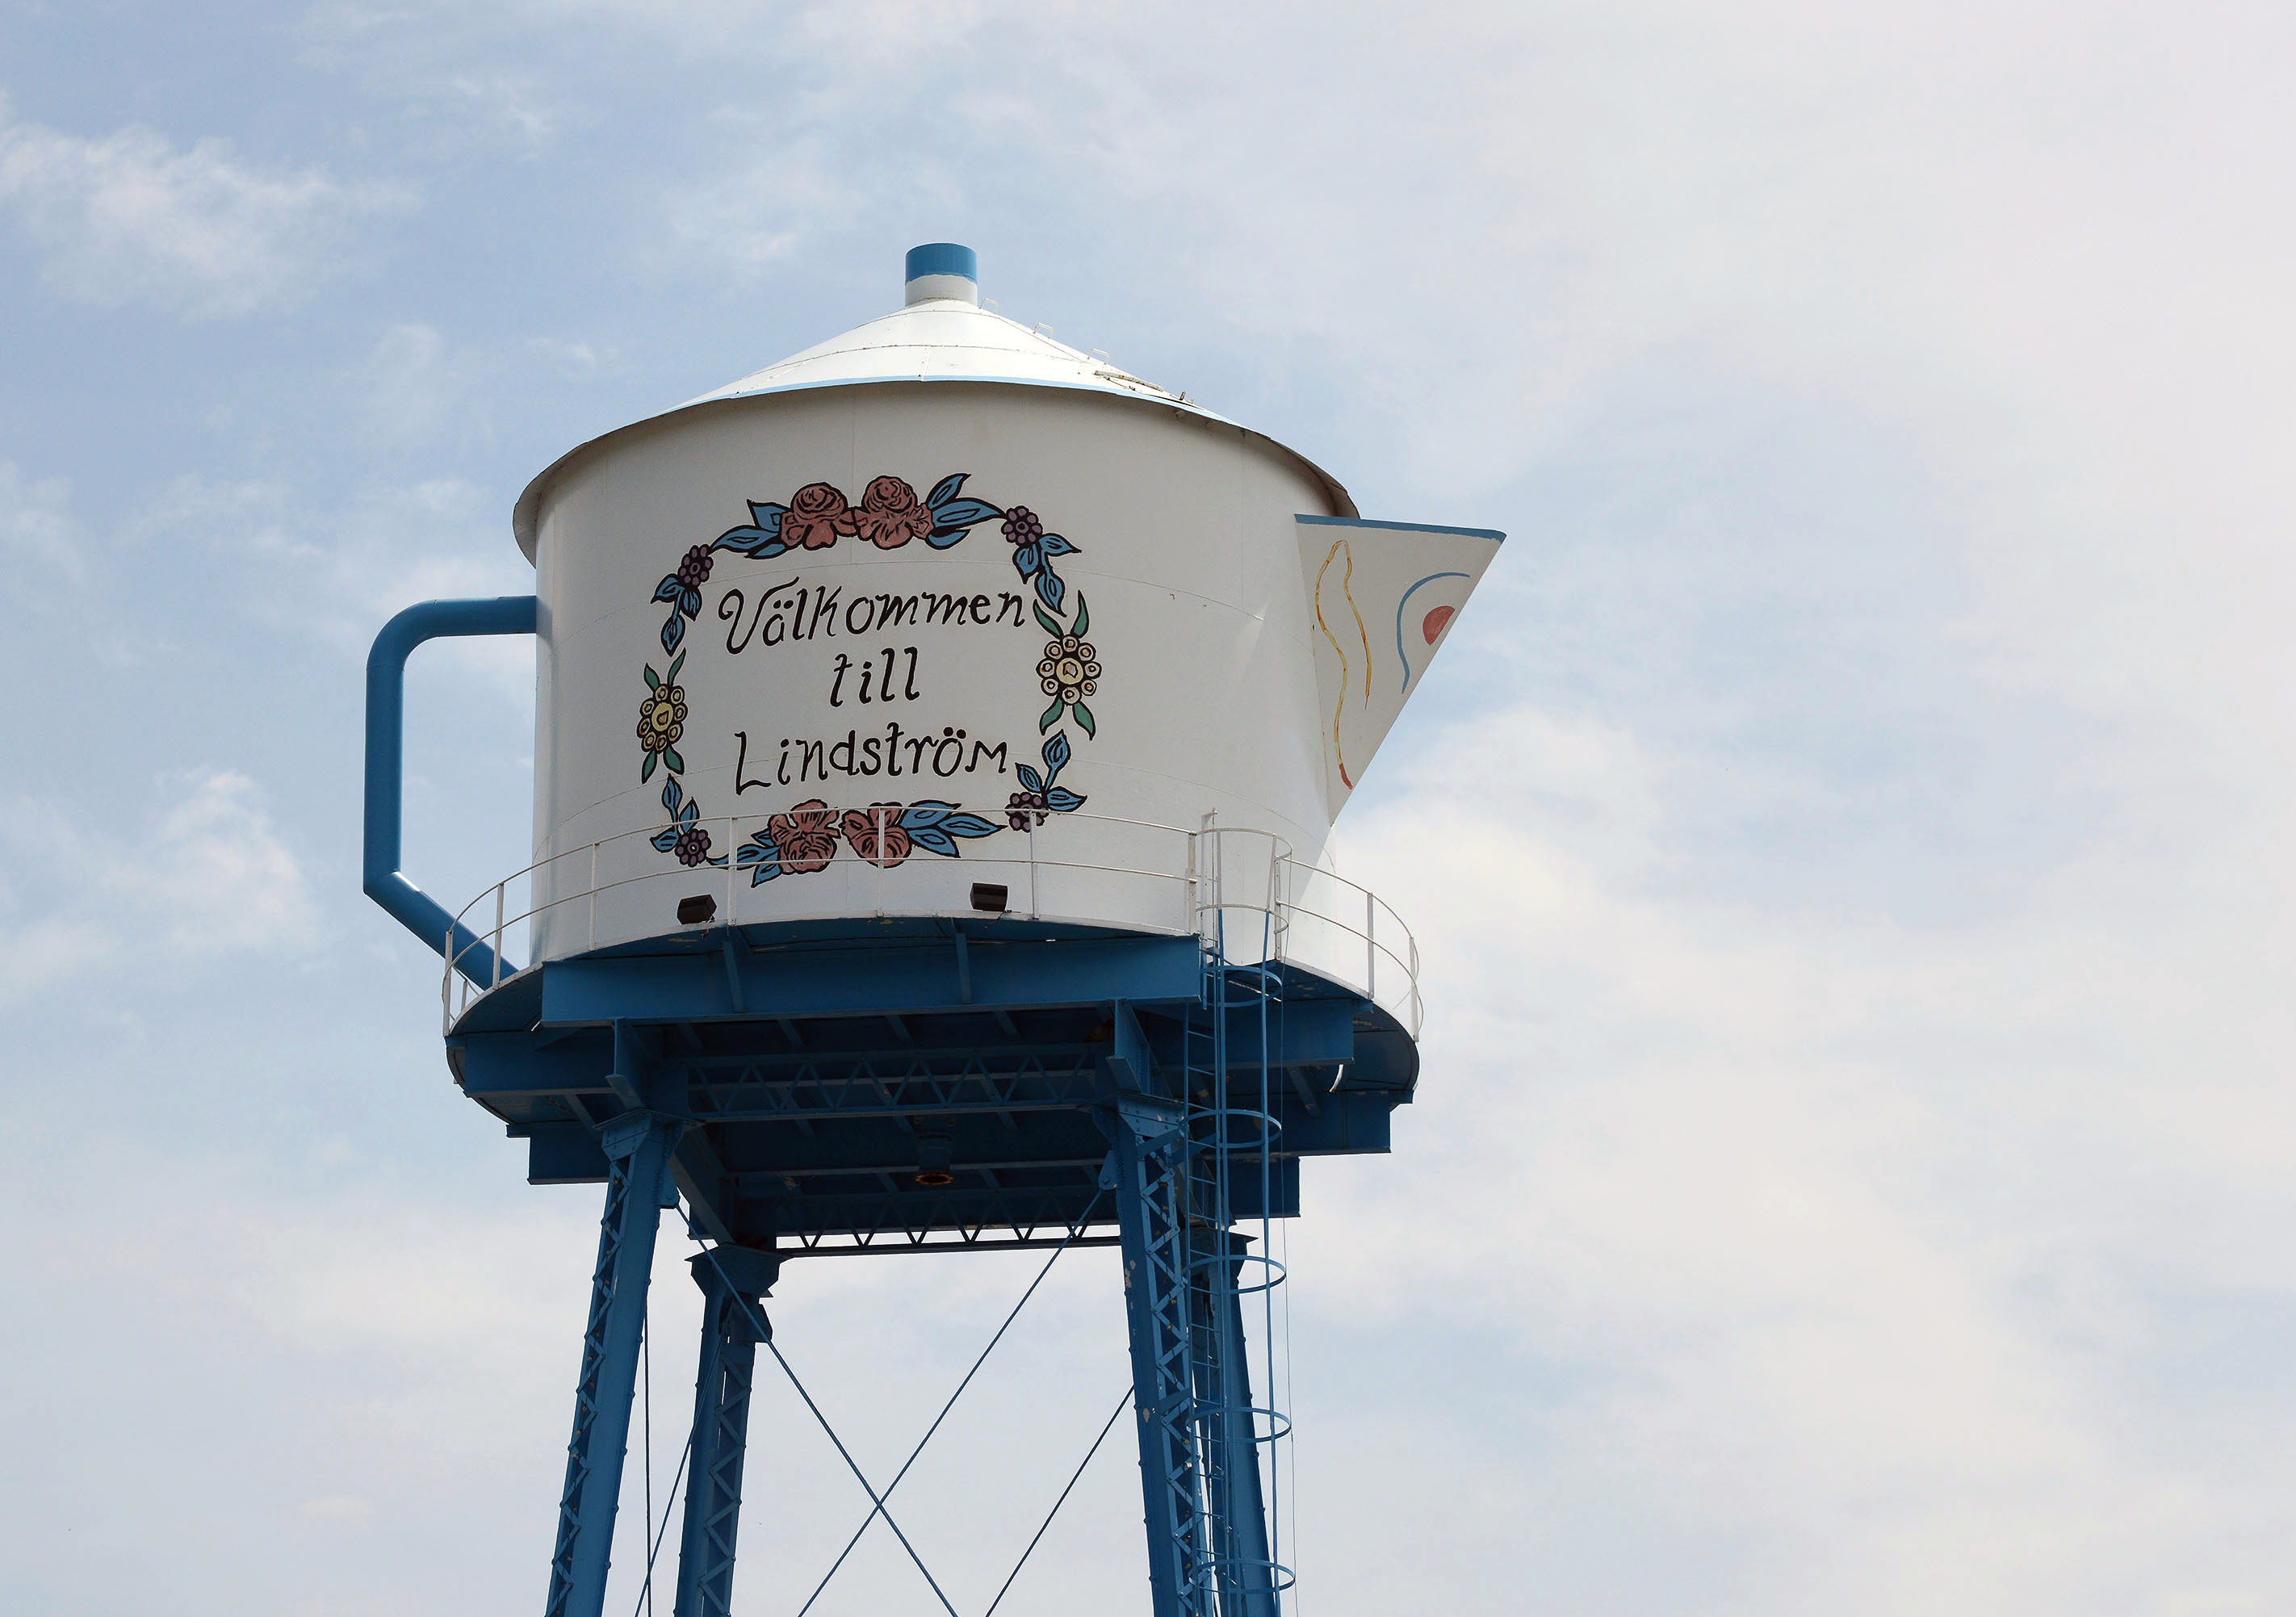 The Lindstrom water tower is shaped as a coffee pot and suggests friendly hospitality.